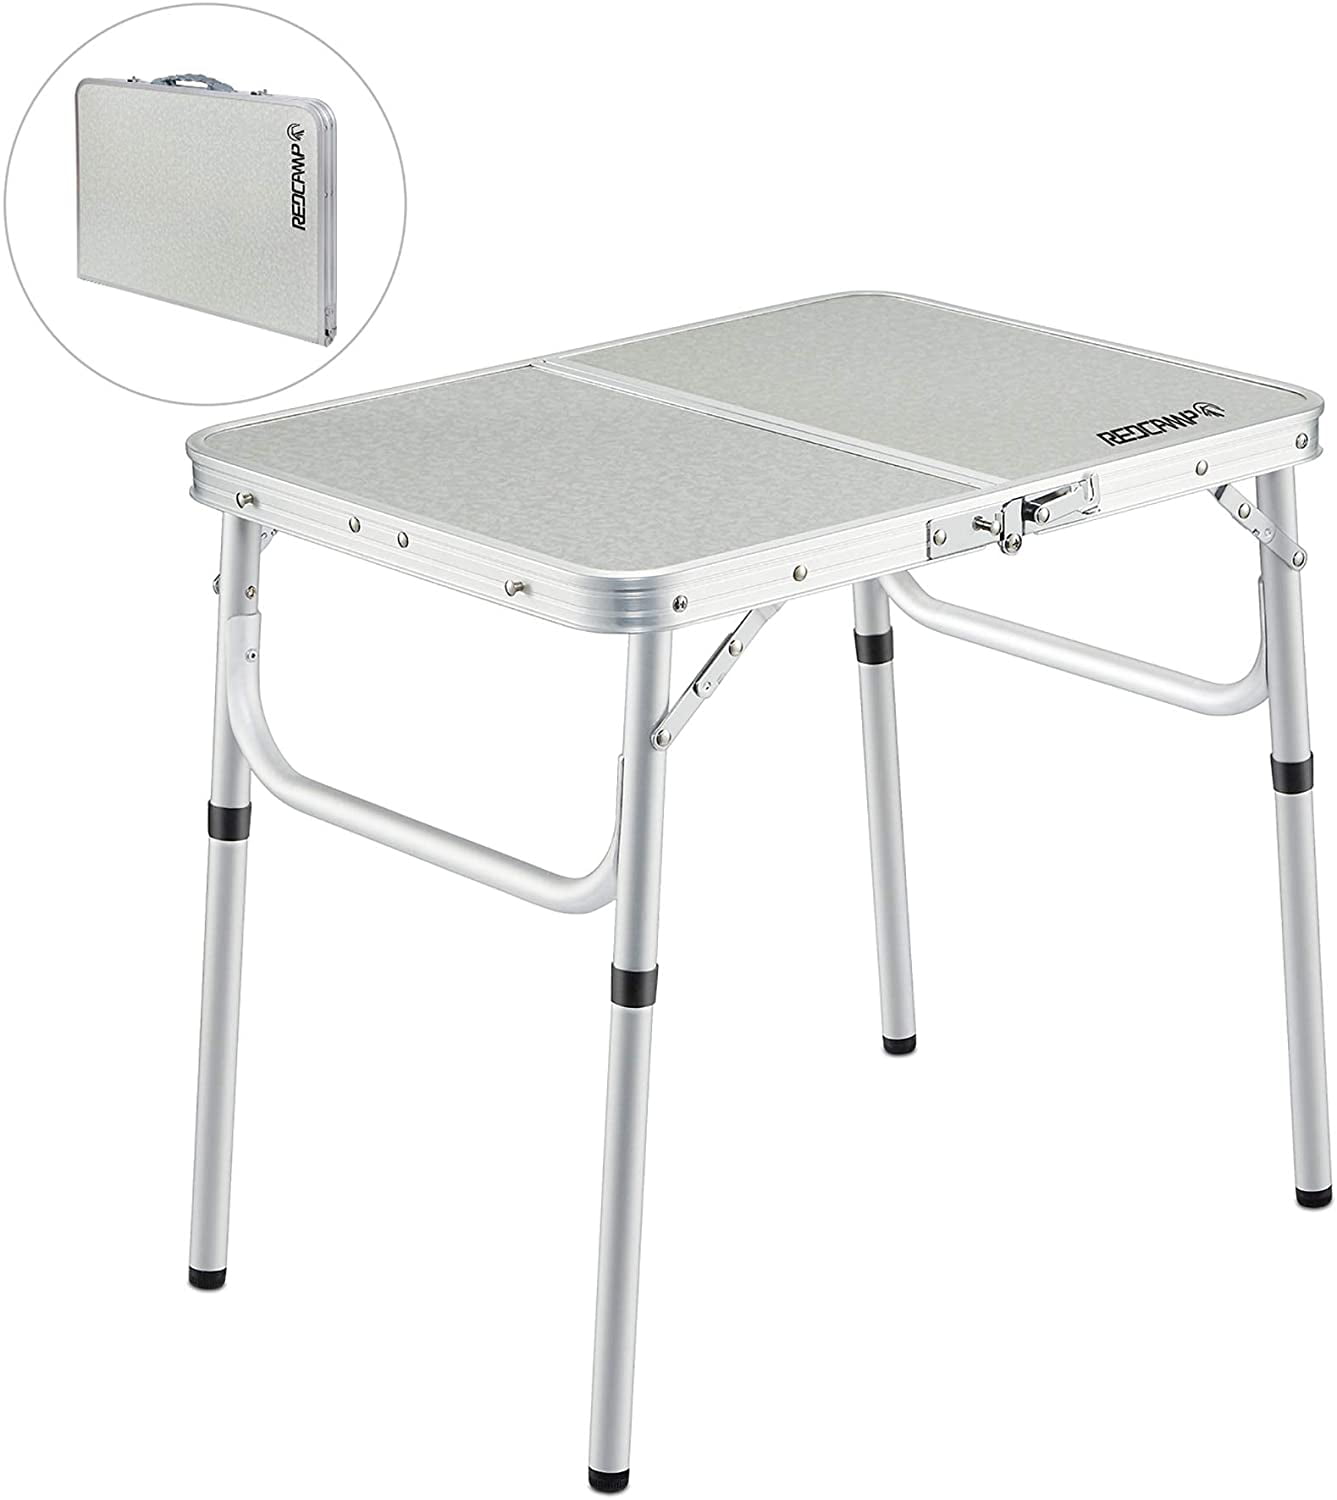 Compact for Picnic BBQ REDCAMP Folding Camping Table 4ft White Portable Lightweight Tri-fold Outdoor Table with Adjustable Heights Aluminum Legs 